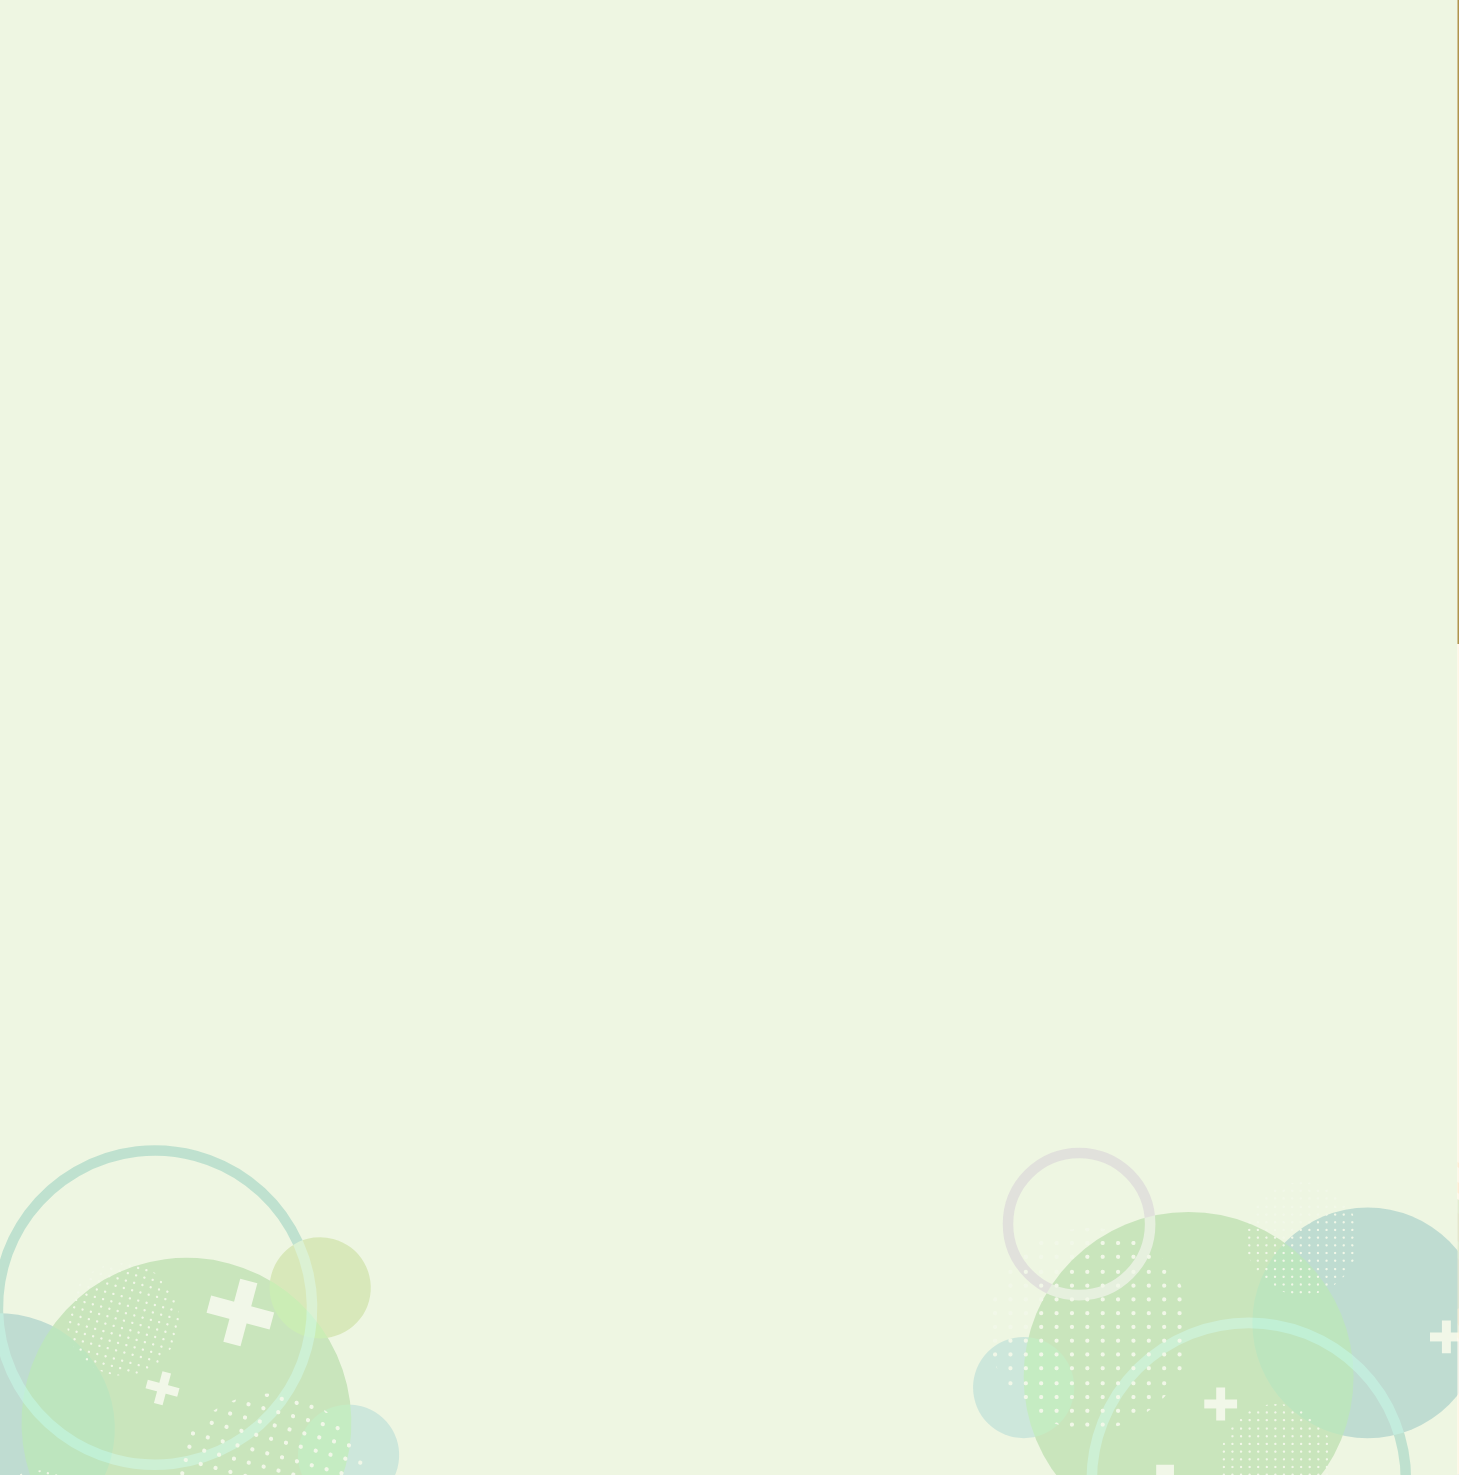 Green background with circular shapes.